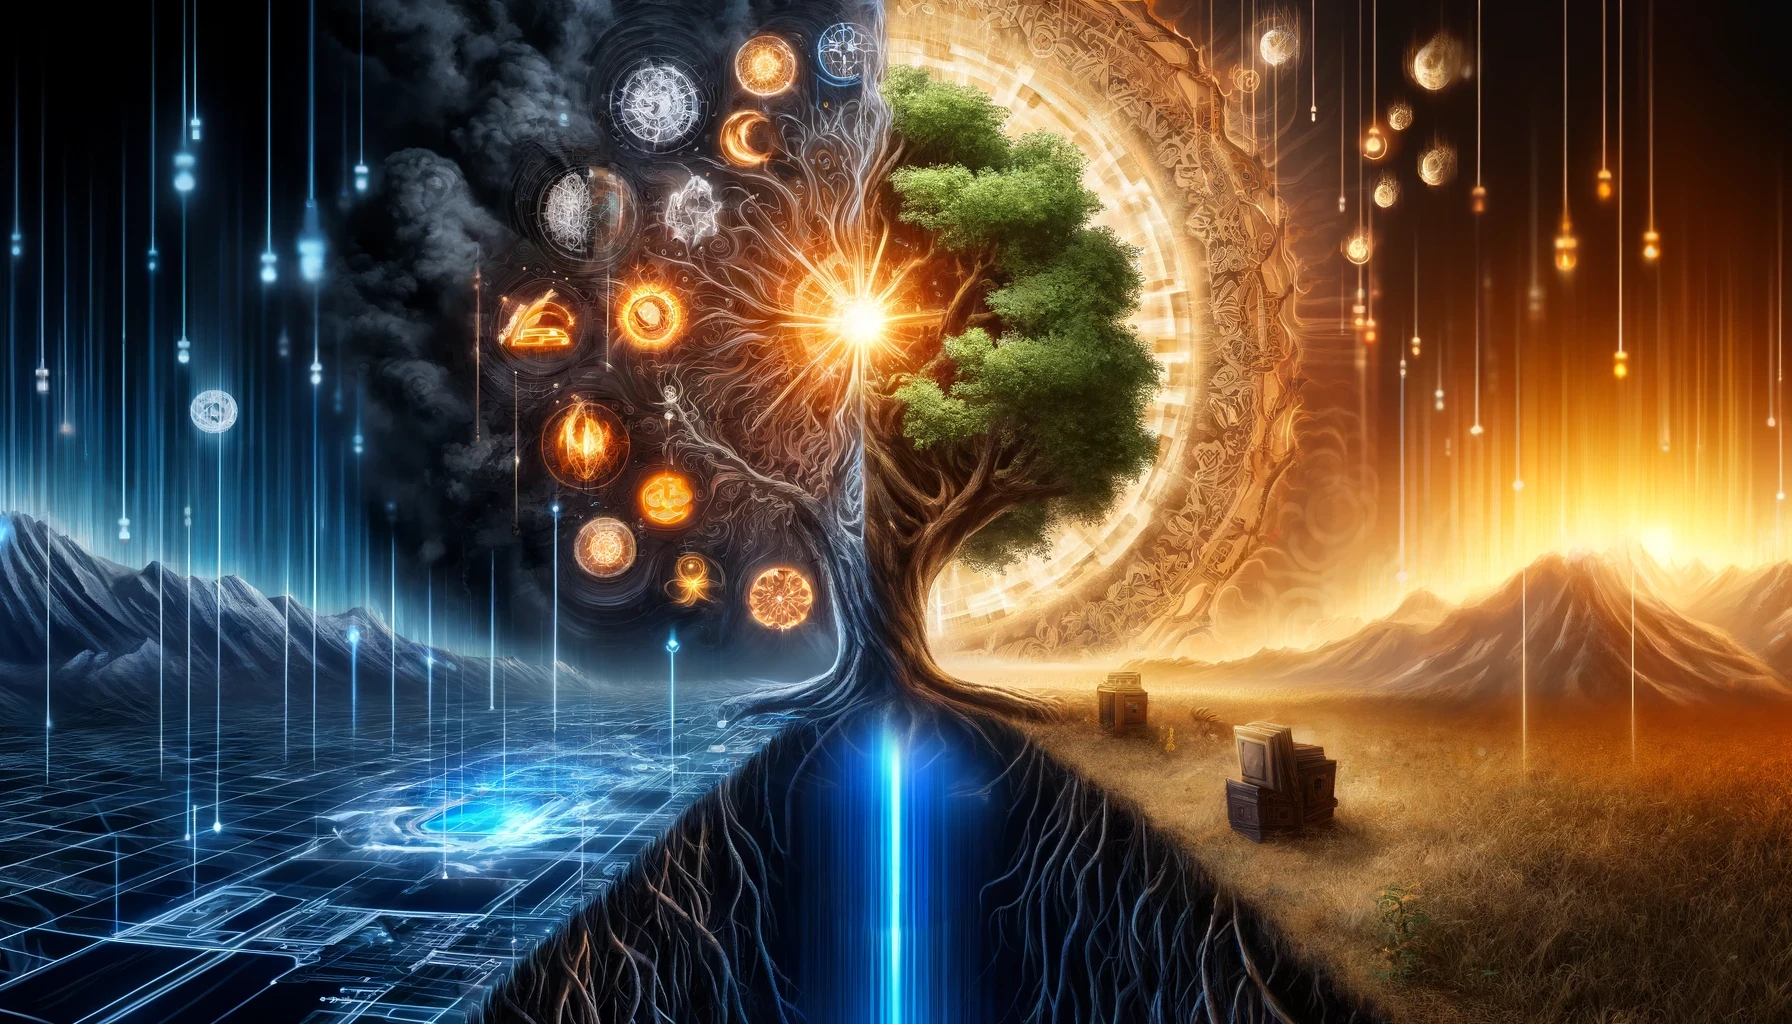 A digital tree of knowledge split in two, representing the duality of knowledge and temptation in the Garden of Eden and the modern digital age. pen_spark